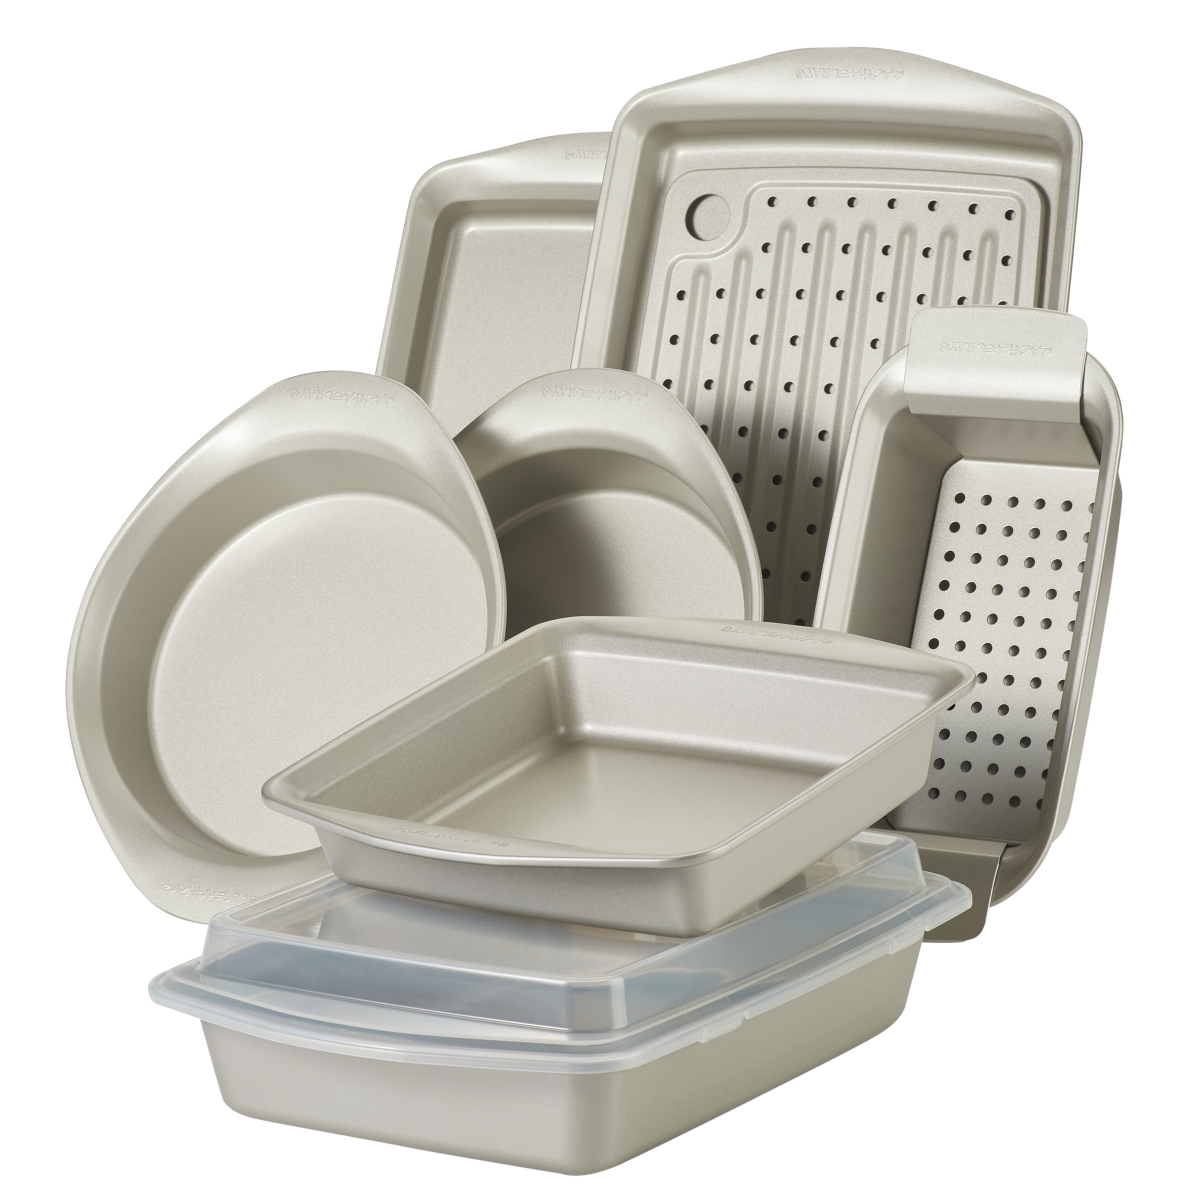 Picture of Rachael Ray 47682 Nonstick Bakeware Set, 10 Piece - Silver